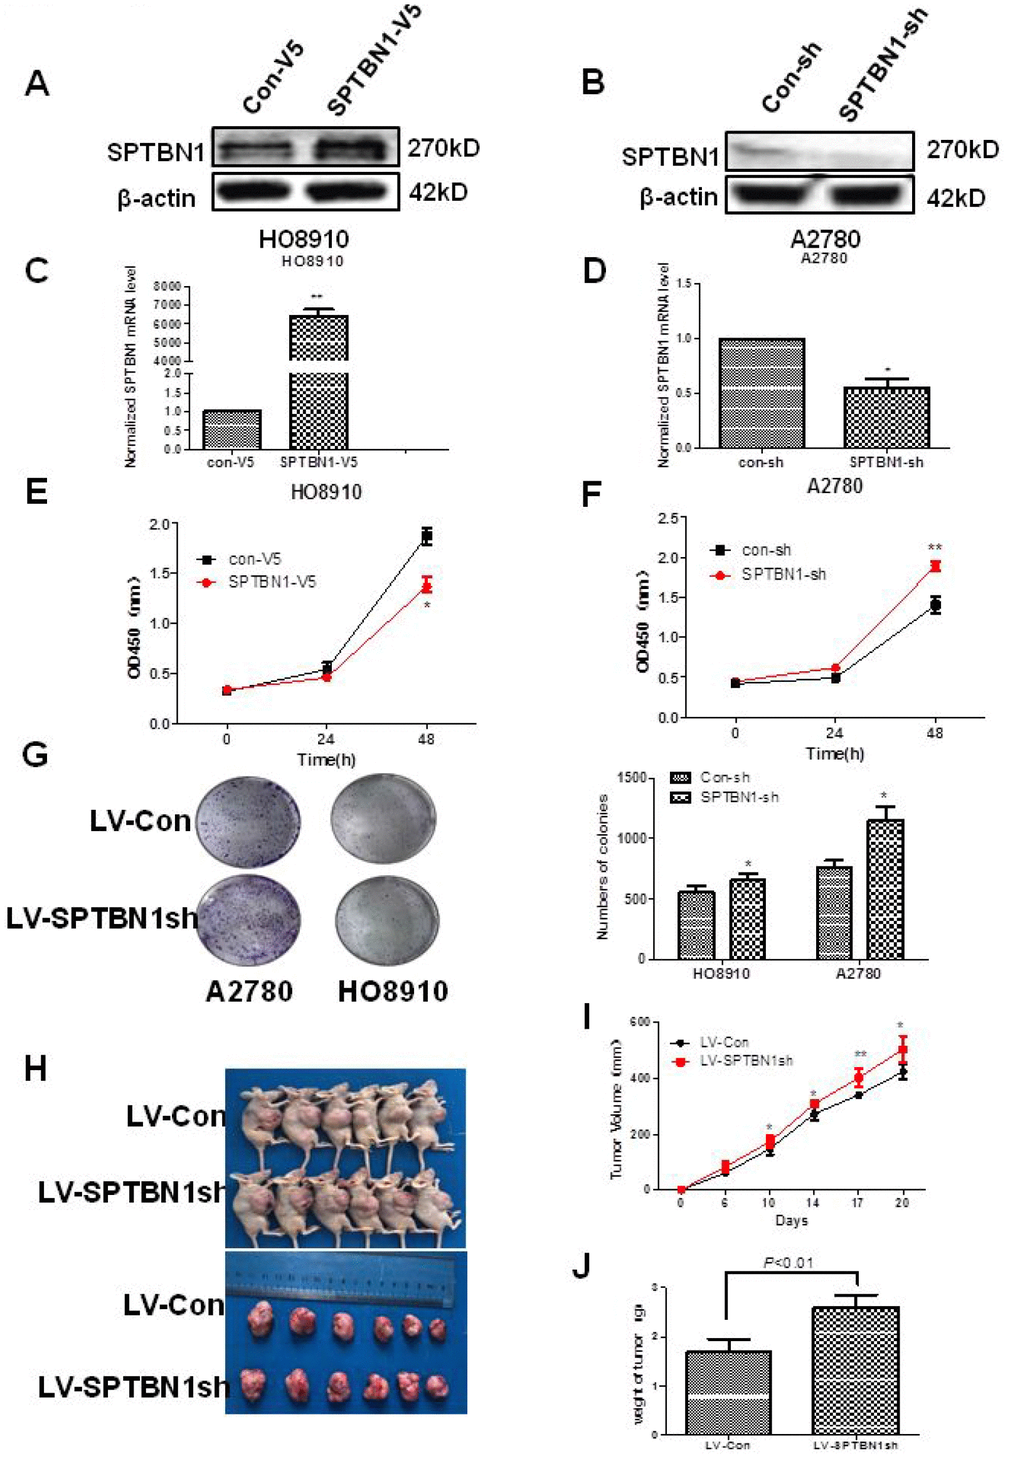 SPTBN1 inhibits the growth of epithelial ovarian cancer cells in vitro and in vivo. (A, B) The protein level of SPTBN1 was detected by western blot. (C, D) The mRNA level of SPTBN1 was analyzed by real-time PCR. SPTBN1 was overexpressed in HO8910 cells but decreased in A2780 cells after transfection with the SPTBN1-V5 or SPTBN1-sh plasmid, respectively. *P P E, F) Cell viability was evaluated by CCK8 assay. **P P G) Cell proliferation was assessed by colony formation assay. Loss of SPTBN1 promotes the proliferation of A2780 and HO8910 cells. *P H–J) Mouse xenograft tumors derived from A2780 cells. Loss of SPTBN1 promotes the growth of epithelial ovarian cancer cells in vivo. (H) Images of mice with tumors (upper) and harvested tumors for each treatment group (lower). (I) Tumor growth curves. (J) Tumor weight at sacrifice. *P P 